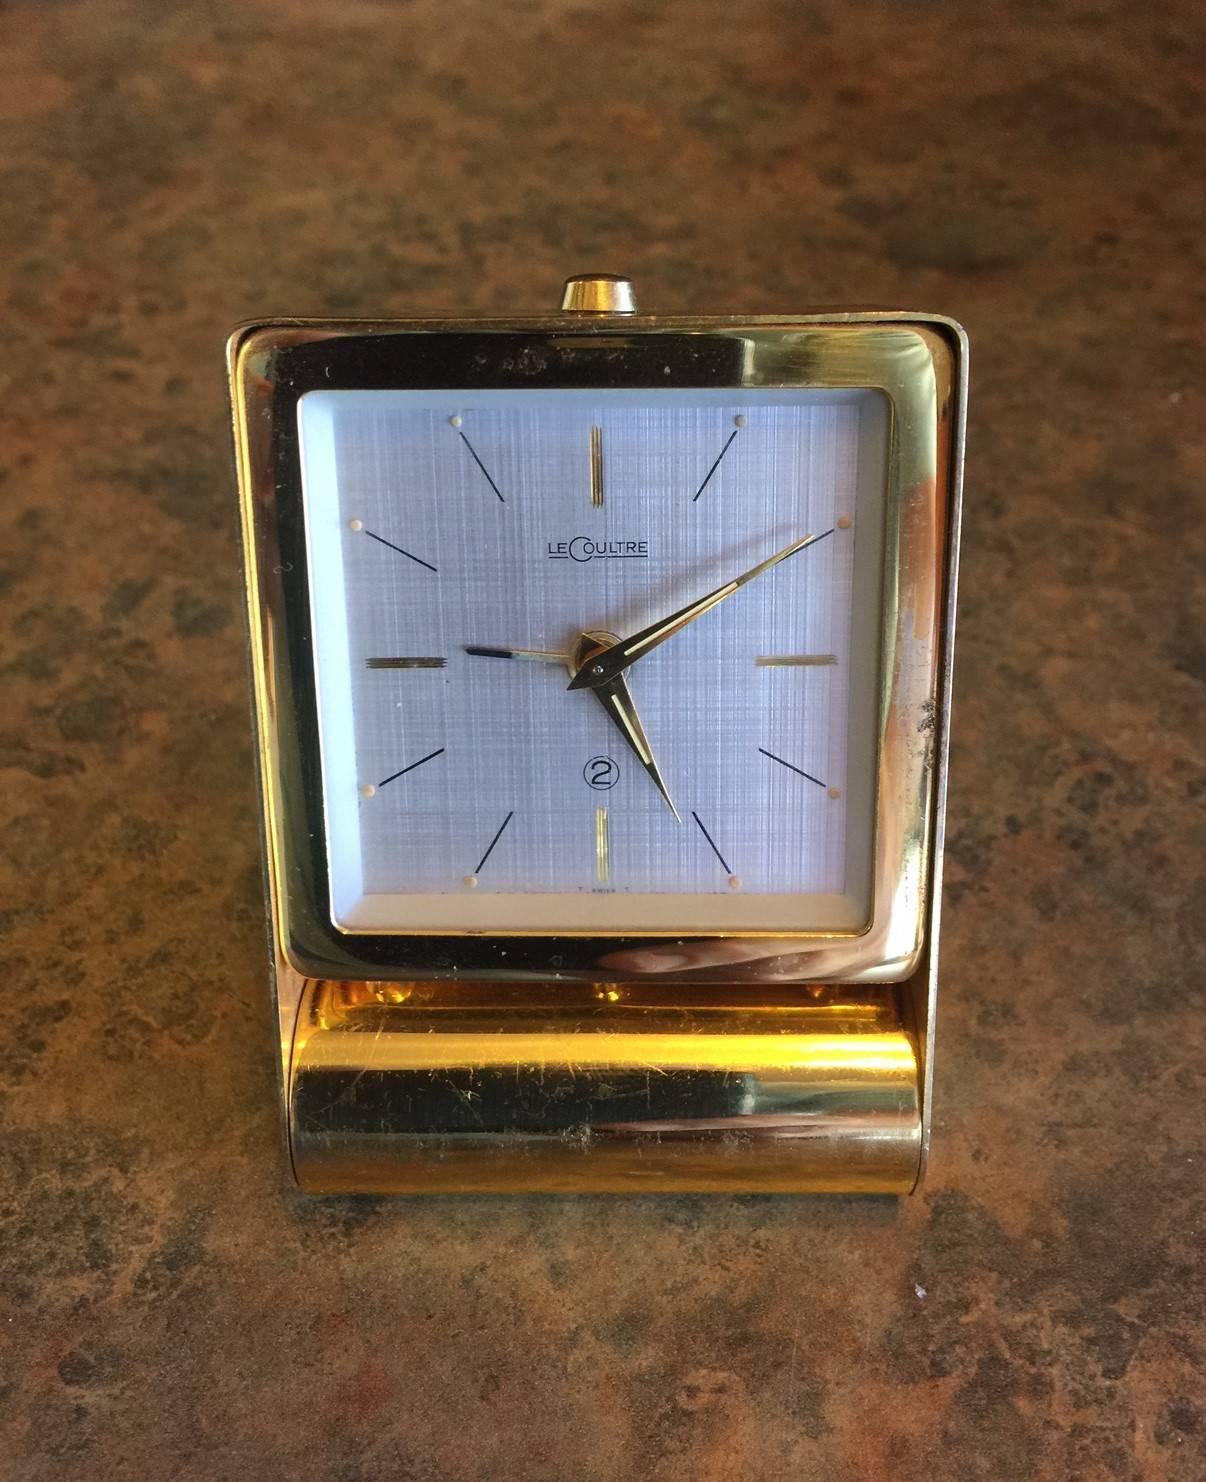 Vintage lacquered brass travel alarm clock by Jaeger LeCoultre, circa 1950s. Gold-colored dial with clockwork, flap lid with setup mode and dials on back.

It is Swiss made, all metal--lacquered brass, to be specific--with a glass face and modern